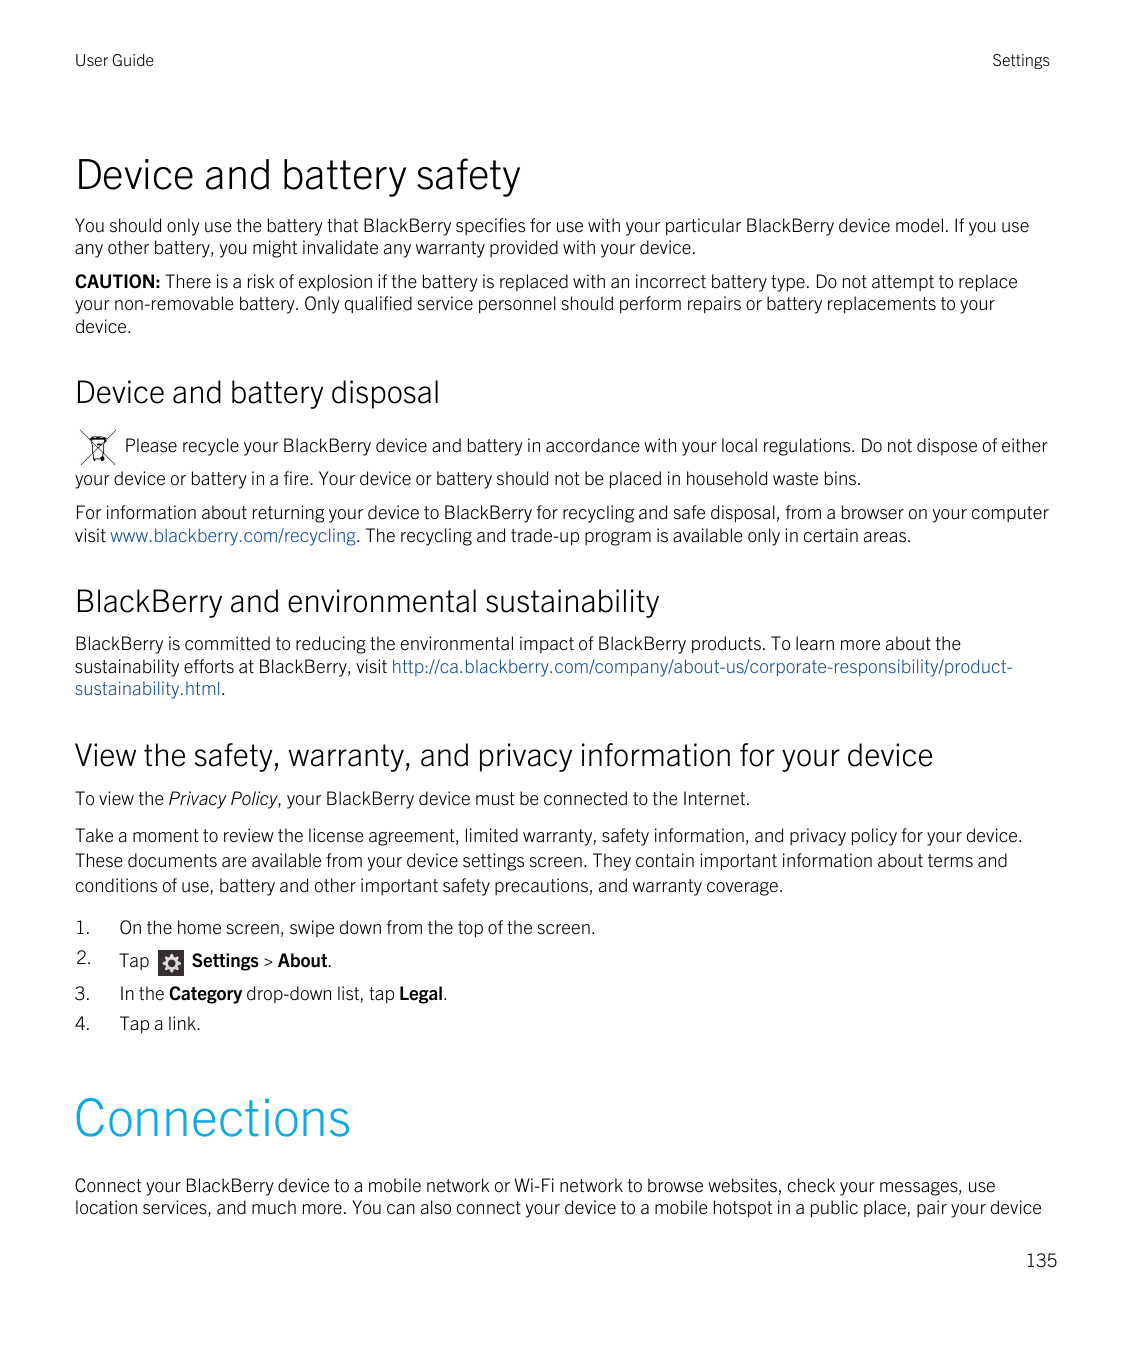 User GuideSettingsDevice and battery safetyYou should only use the battery that BlackBerry specifies for use with your particula